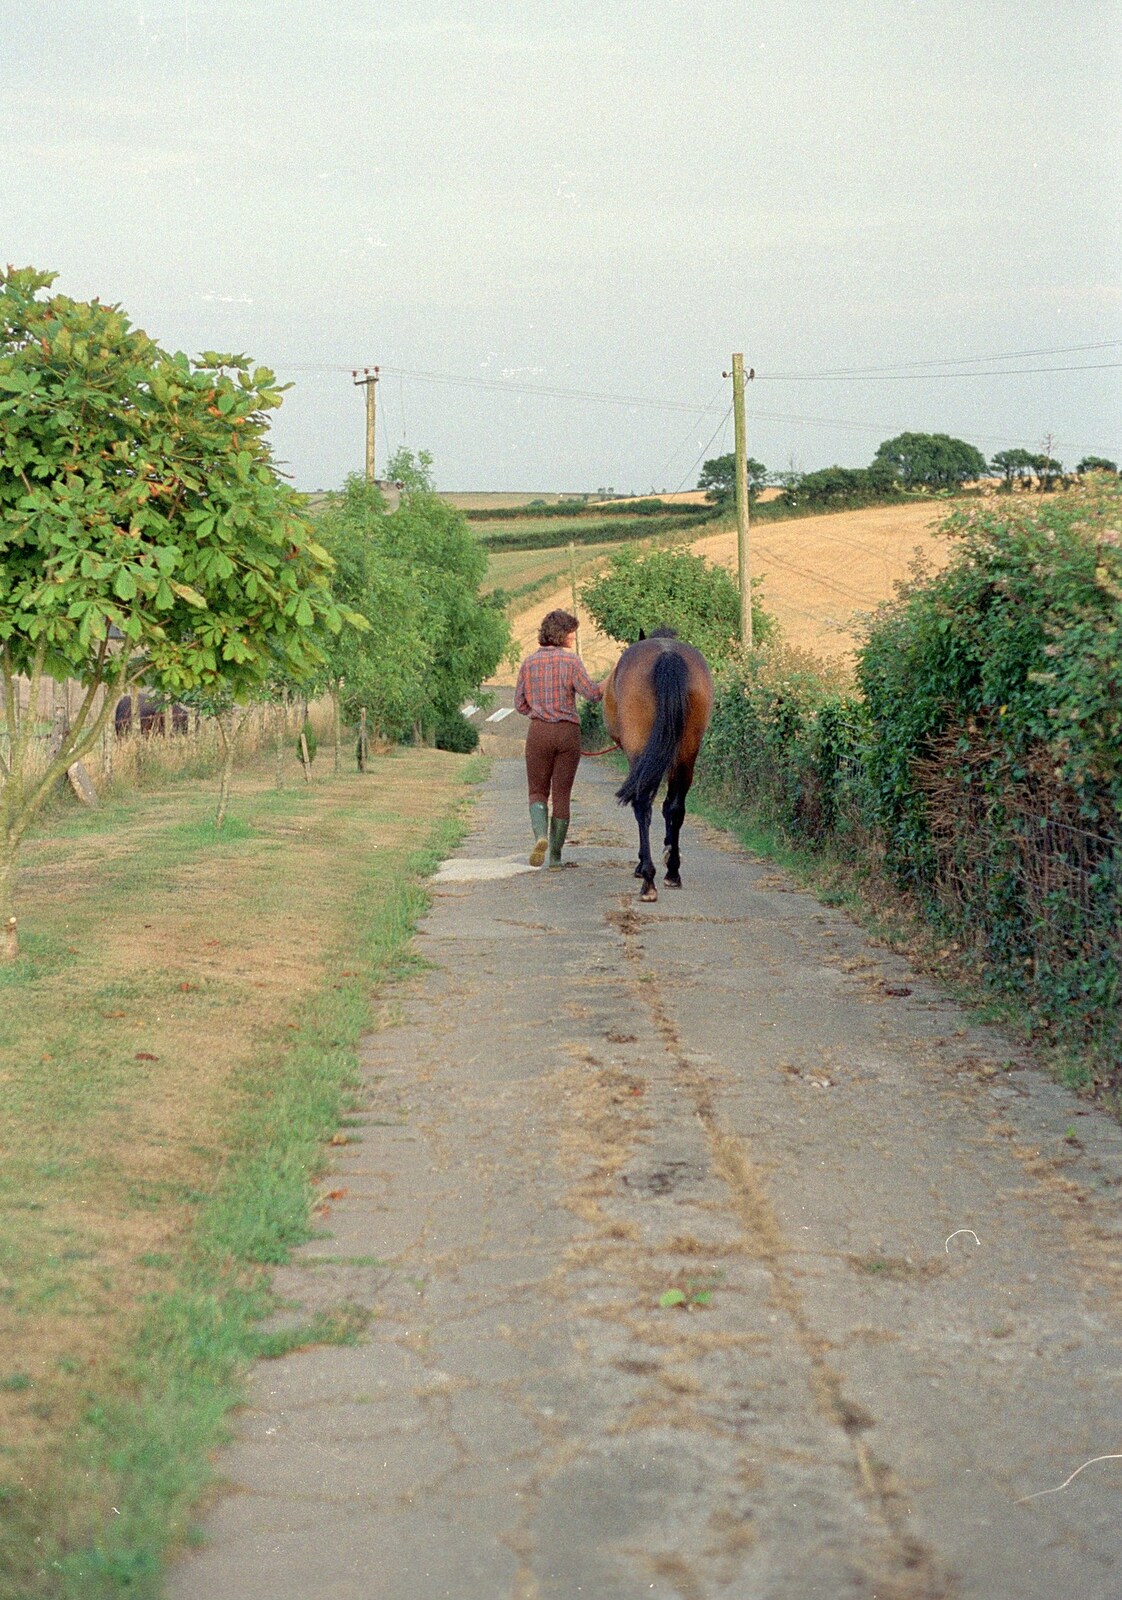 Angela takes Oberon for a walk down the drive from Summer Days on Pitt Farm, Harbertonford, Devon - 17th July 1989